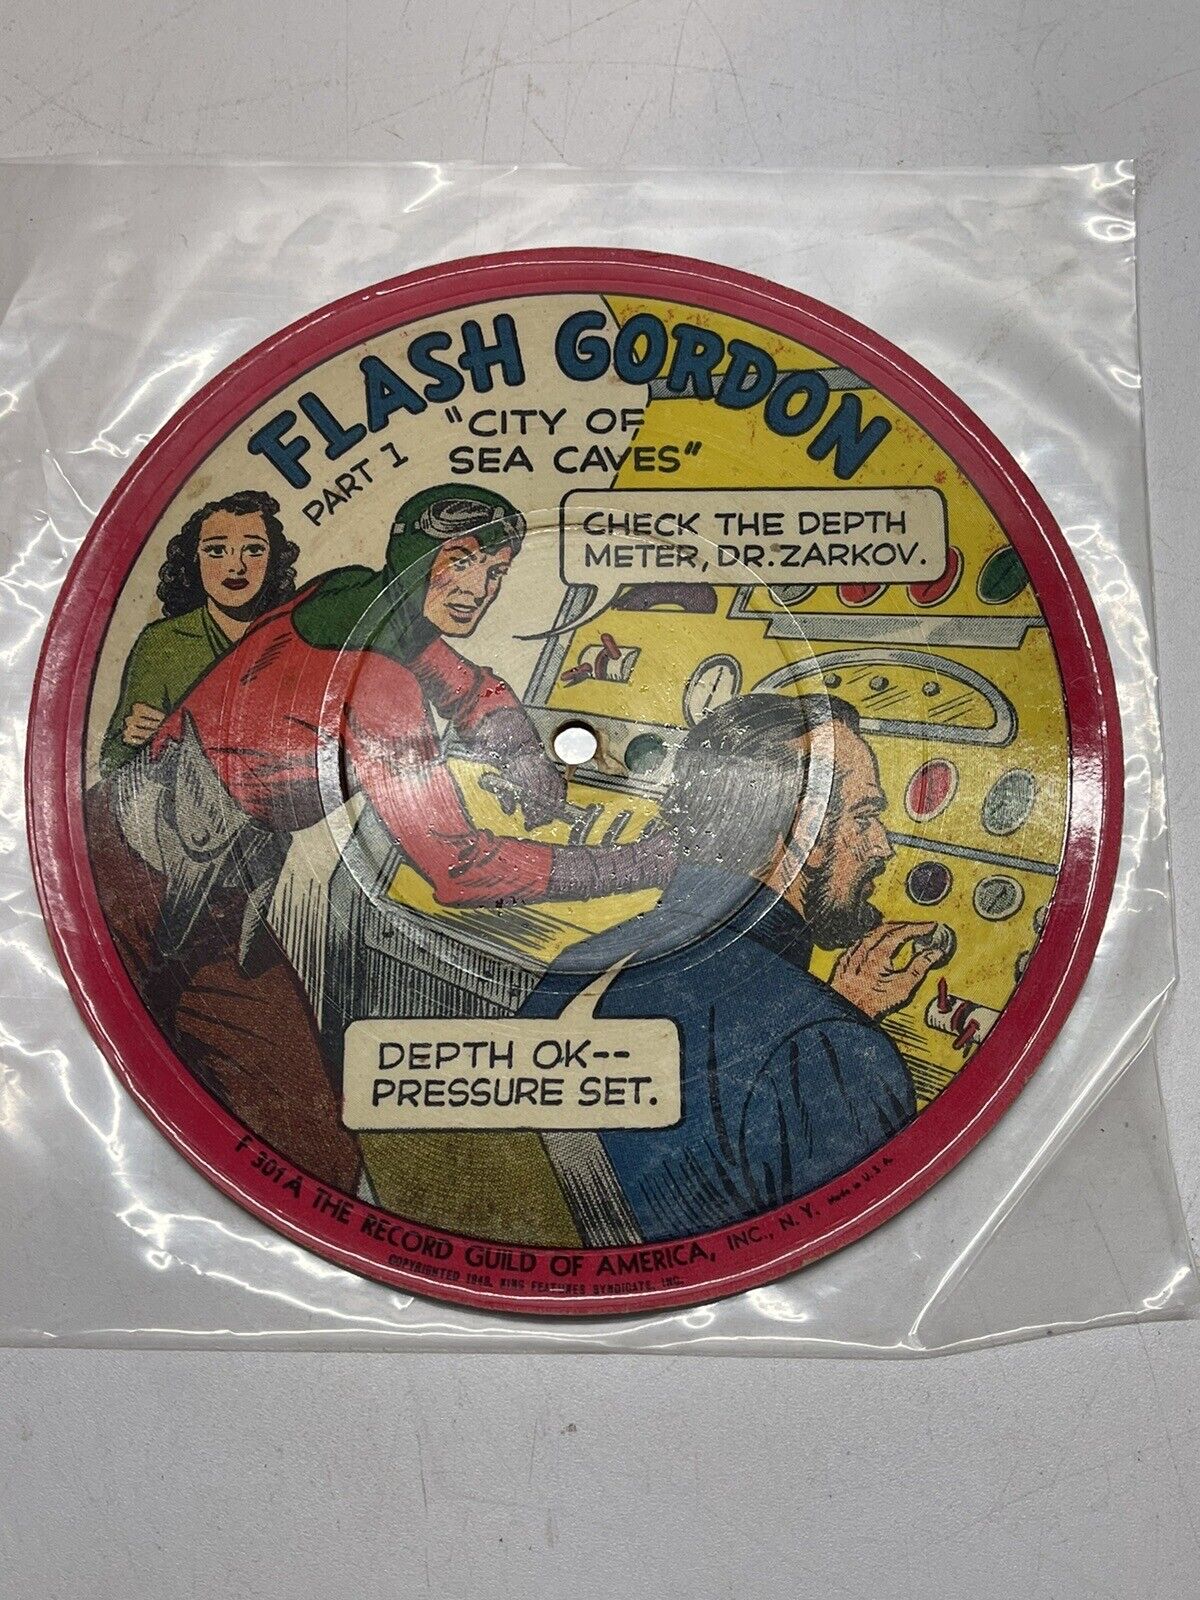 Old Vtg 1948 Flash Gordon Picture Disk City of Sea Caves Colorful Record NY USA